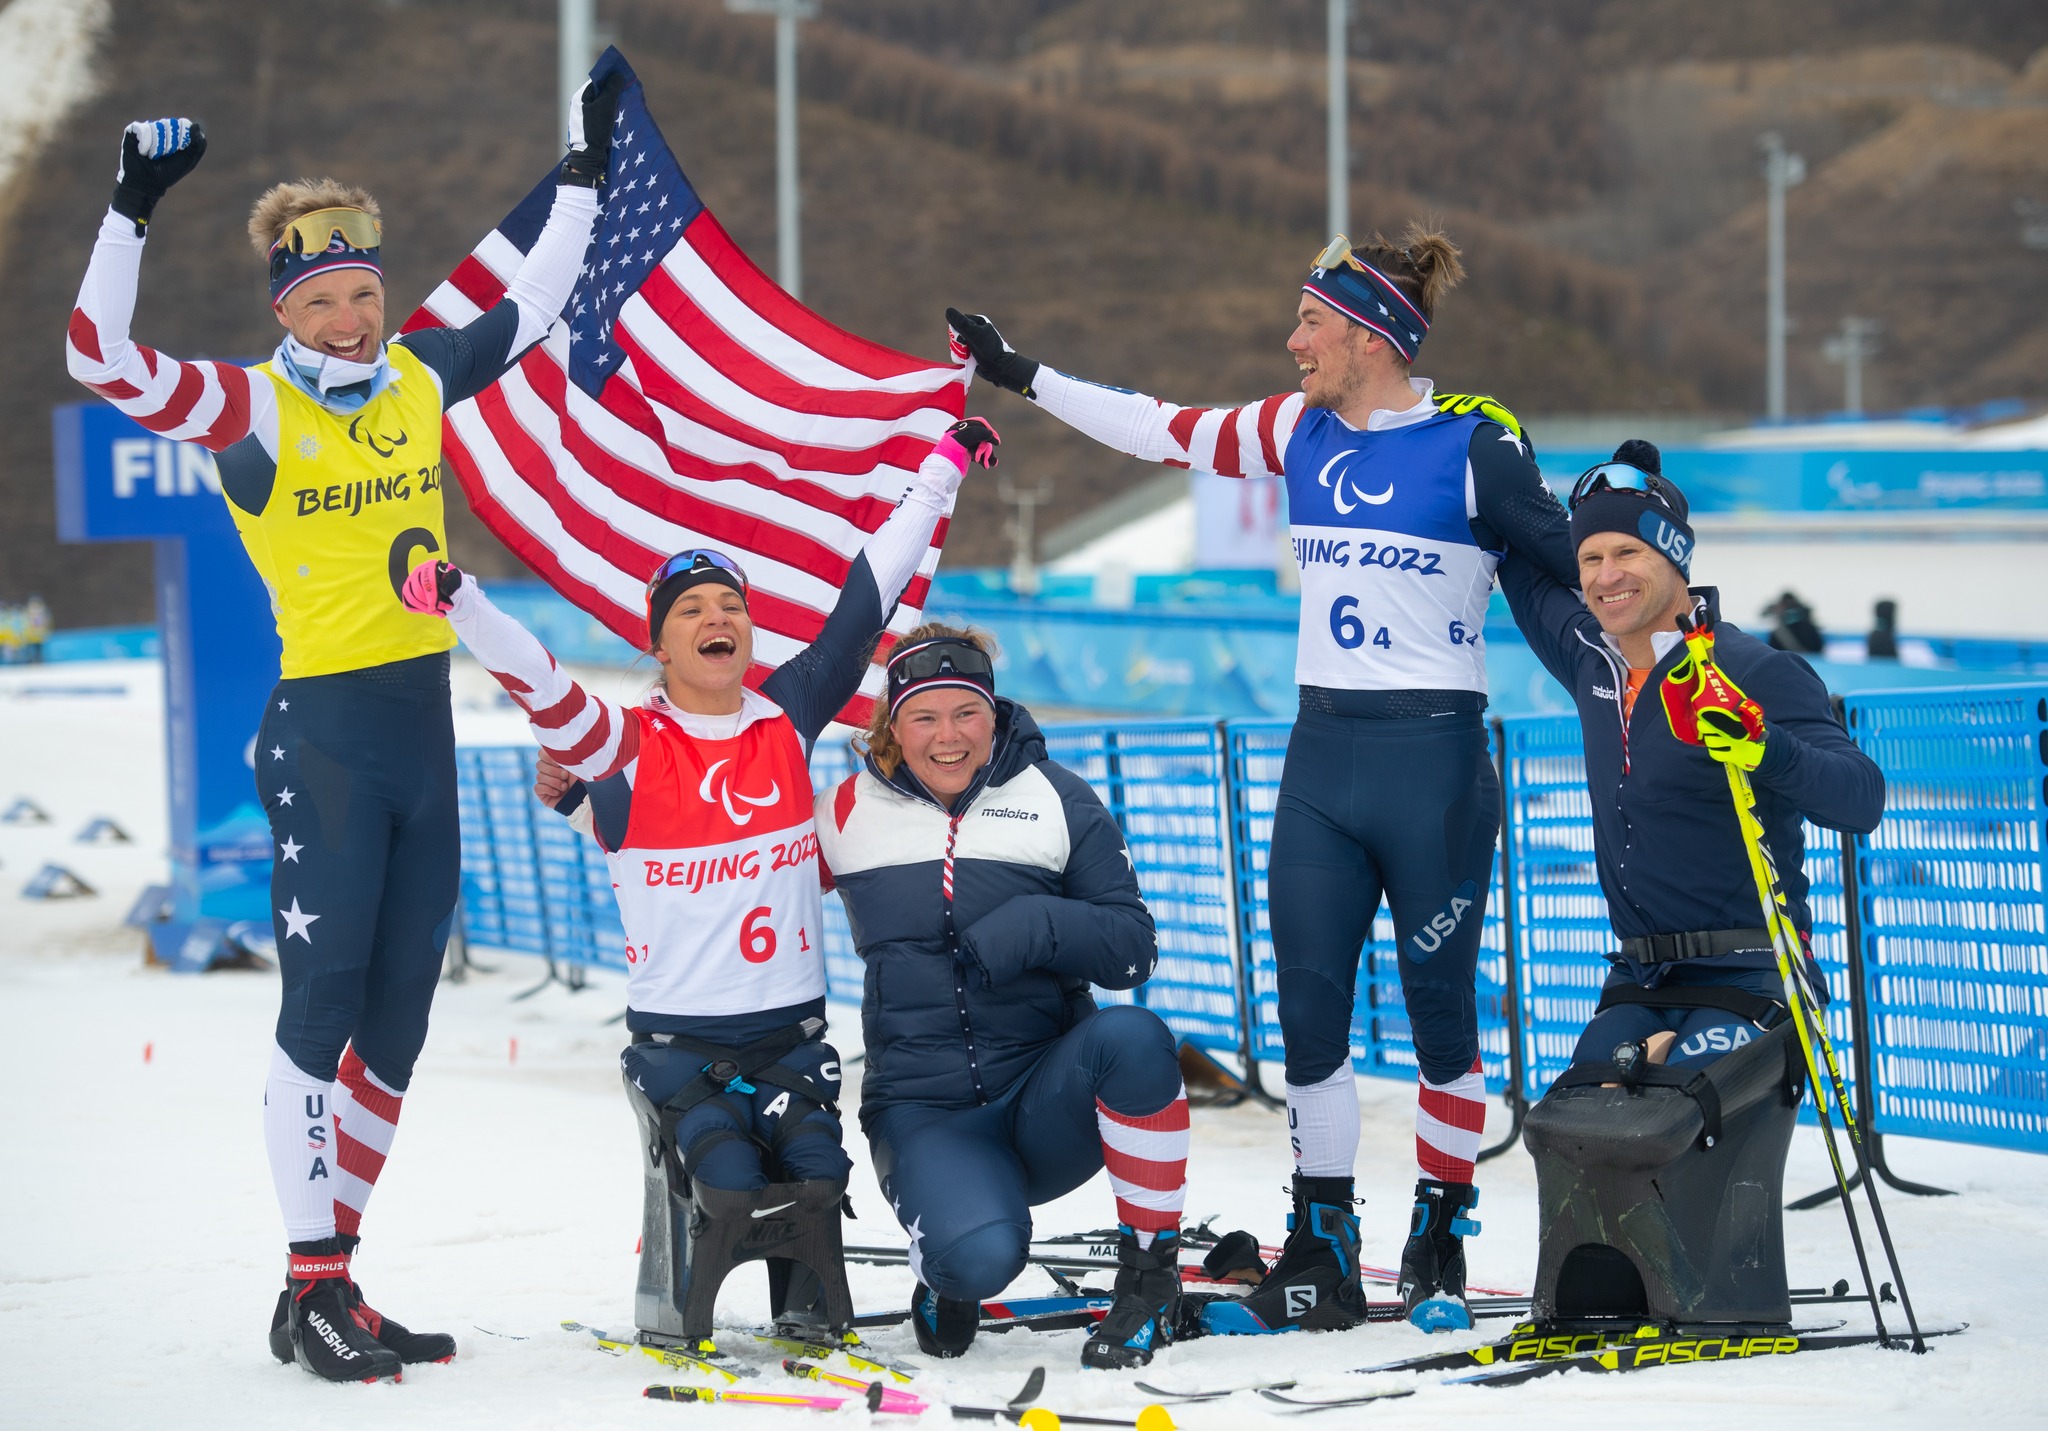 Press Release) Team USA Wins Mixed Relay Gold to Close Out Nordic 